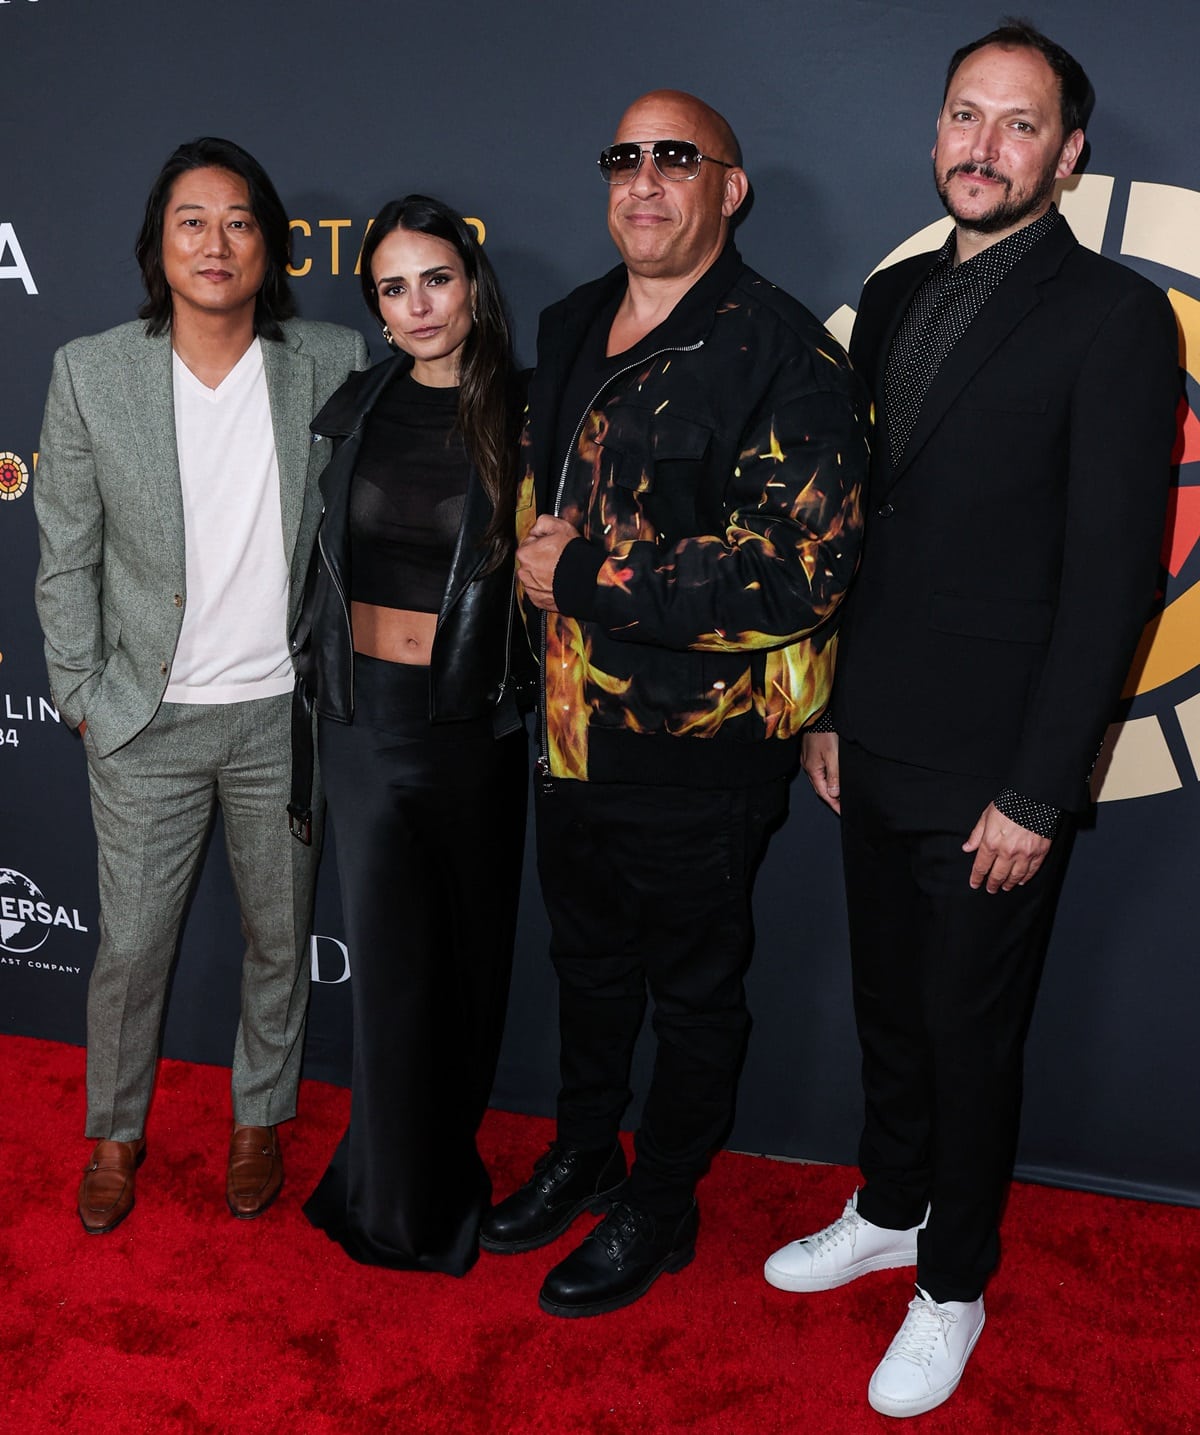 At the Charlize Theron Africa Outreach Project 2023 Block Party on May 20, 2023, in Universal City, California, Sung Kang stood at 6ft 0 (182.9 cm), Jordana Brewster at 5ft 6 ½ (168.9 cm), Vin Diesel at 5ft 11 ½ (181.6 cm), and Louis Leterrier towered at 6′ 4″ (1.93 m)